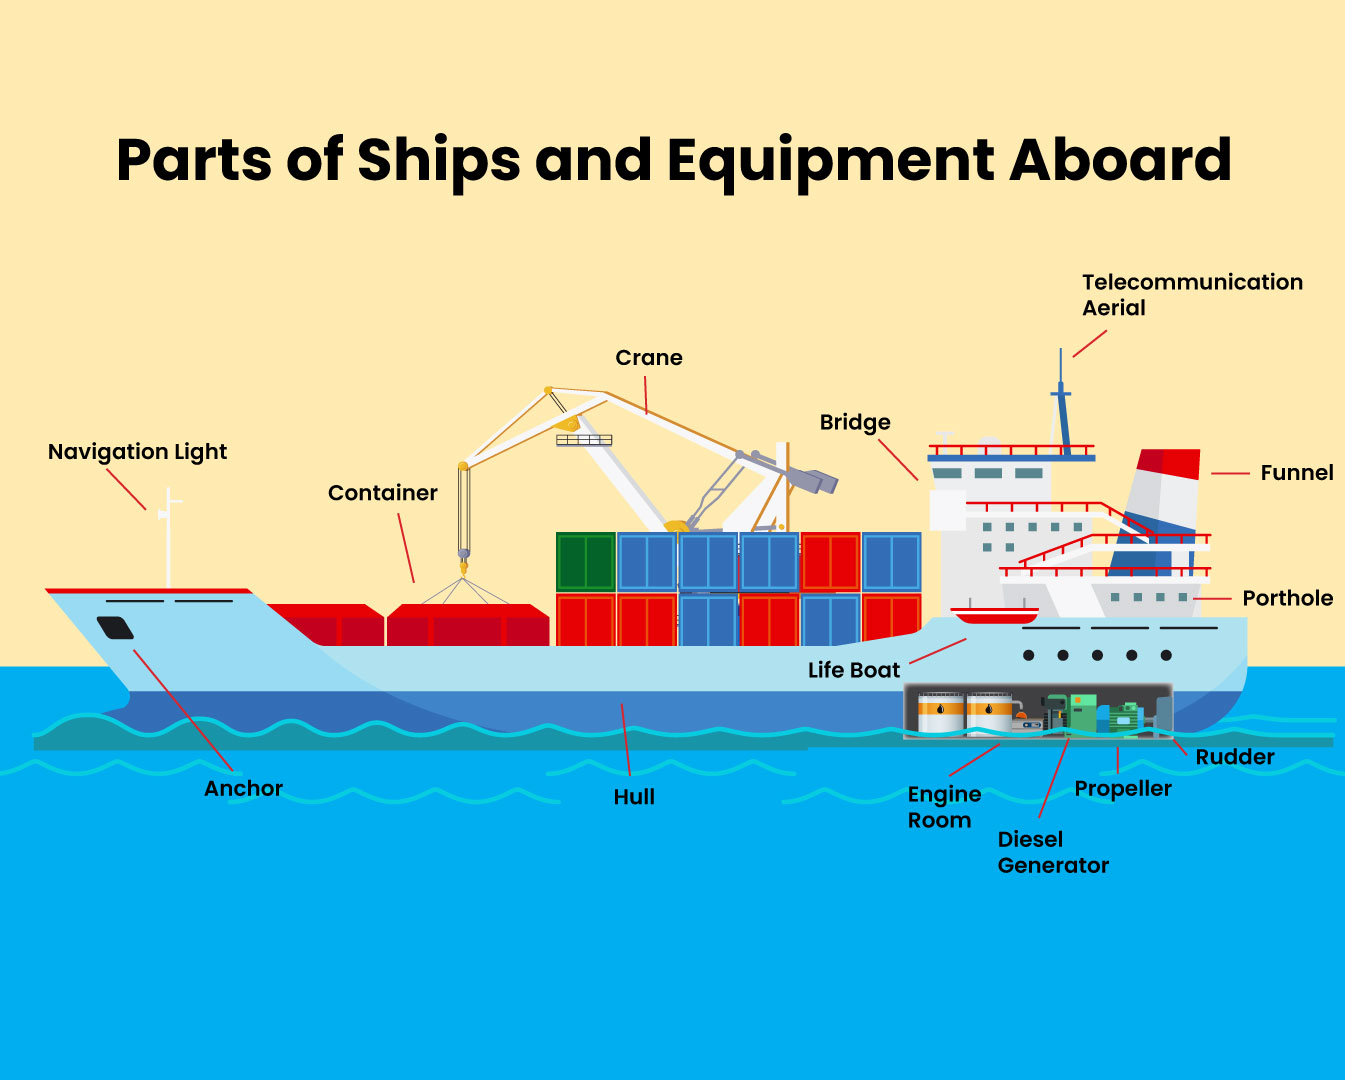 Parts of Ships Equipment Aboard